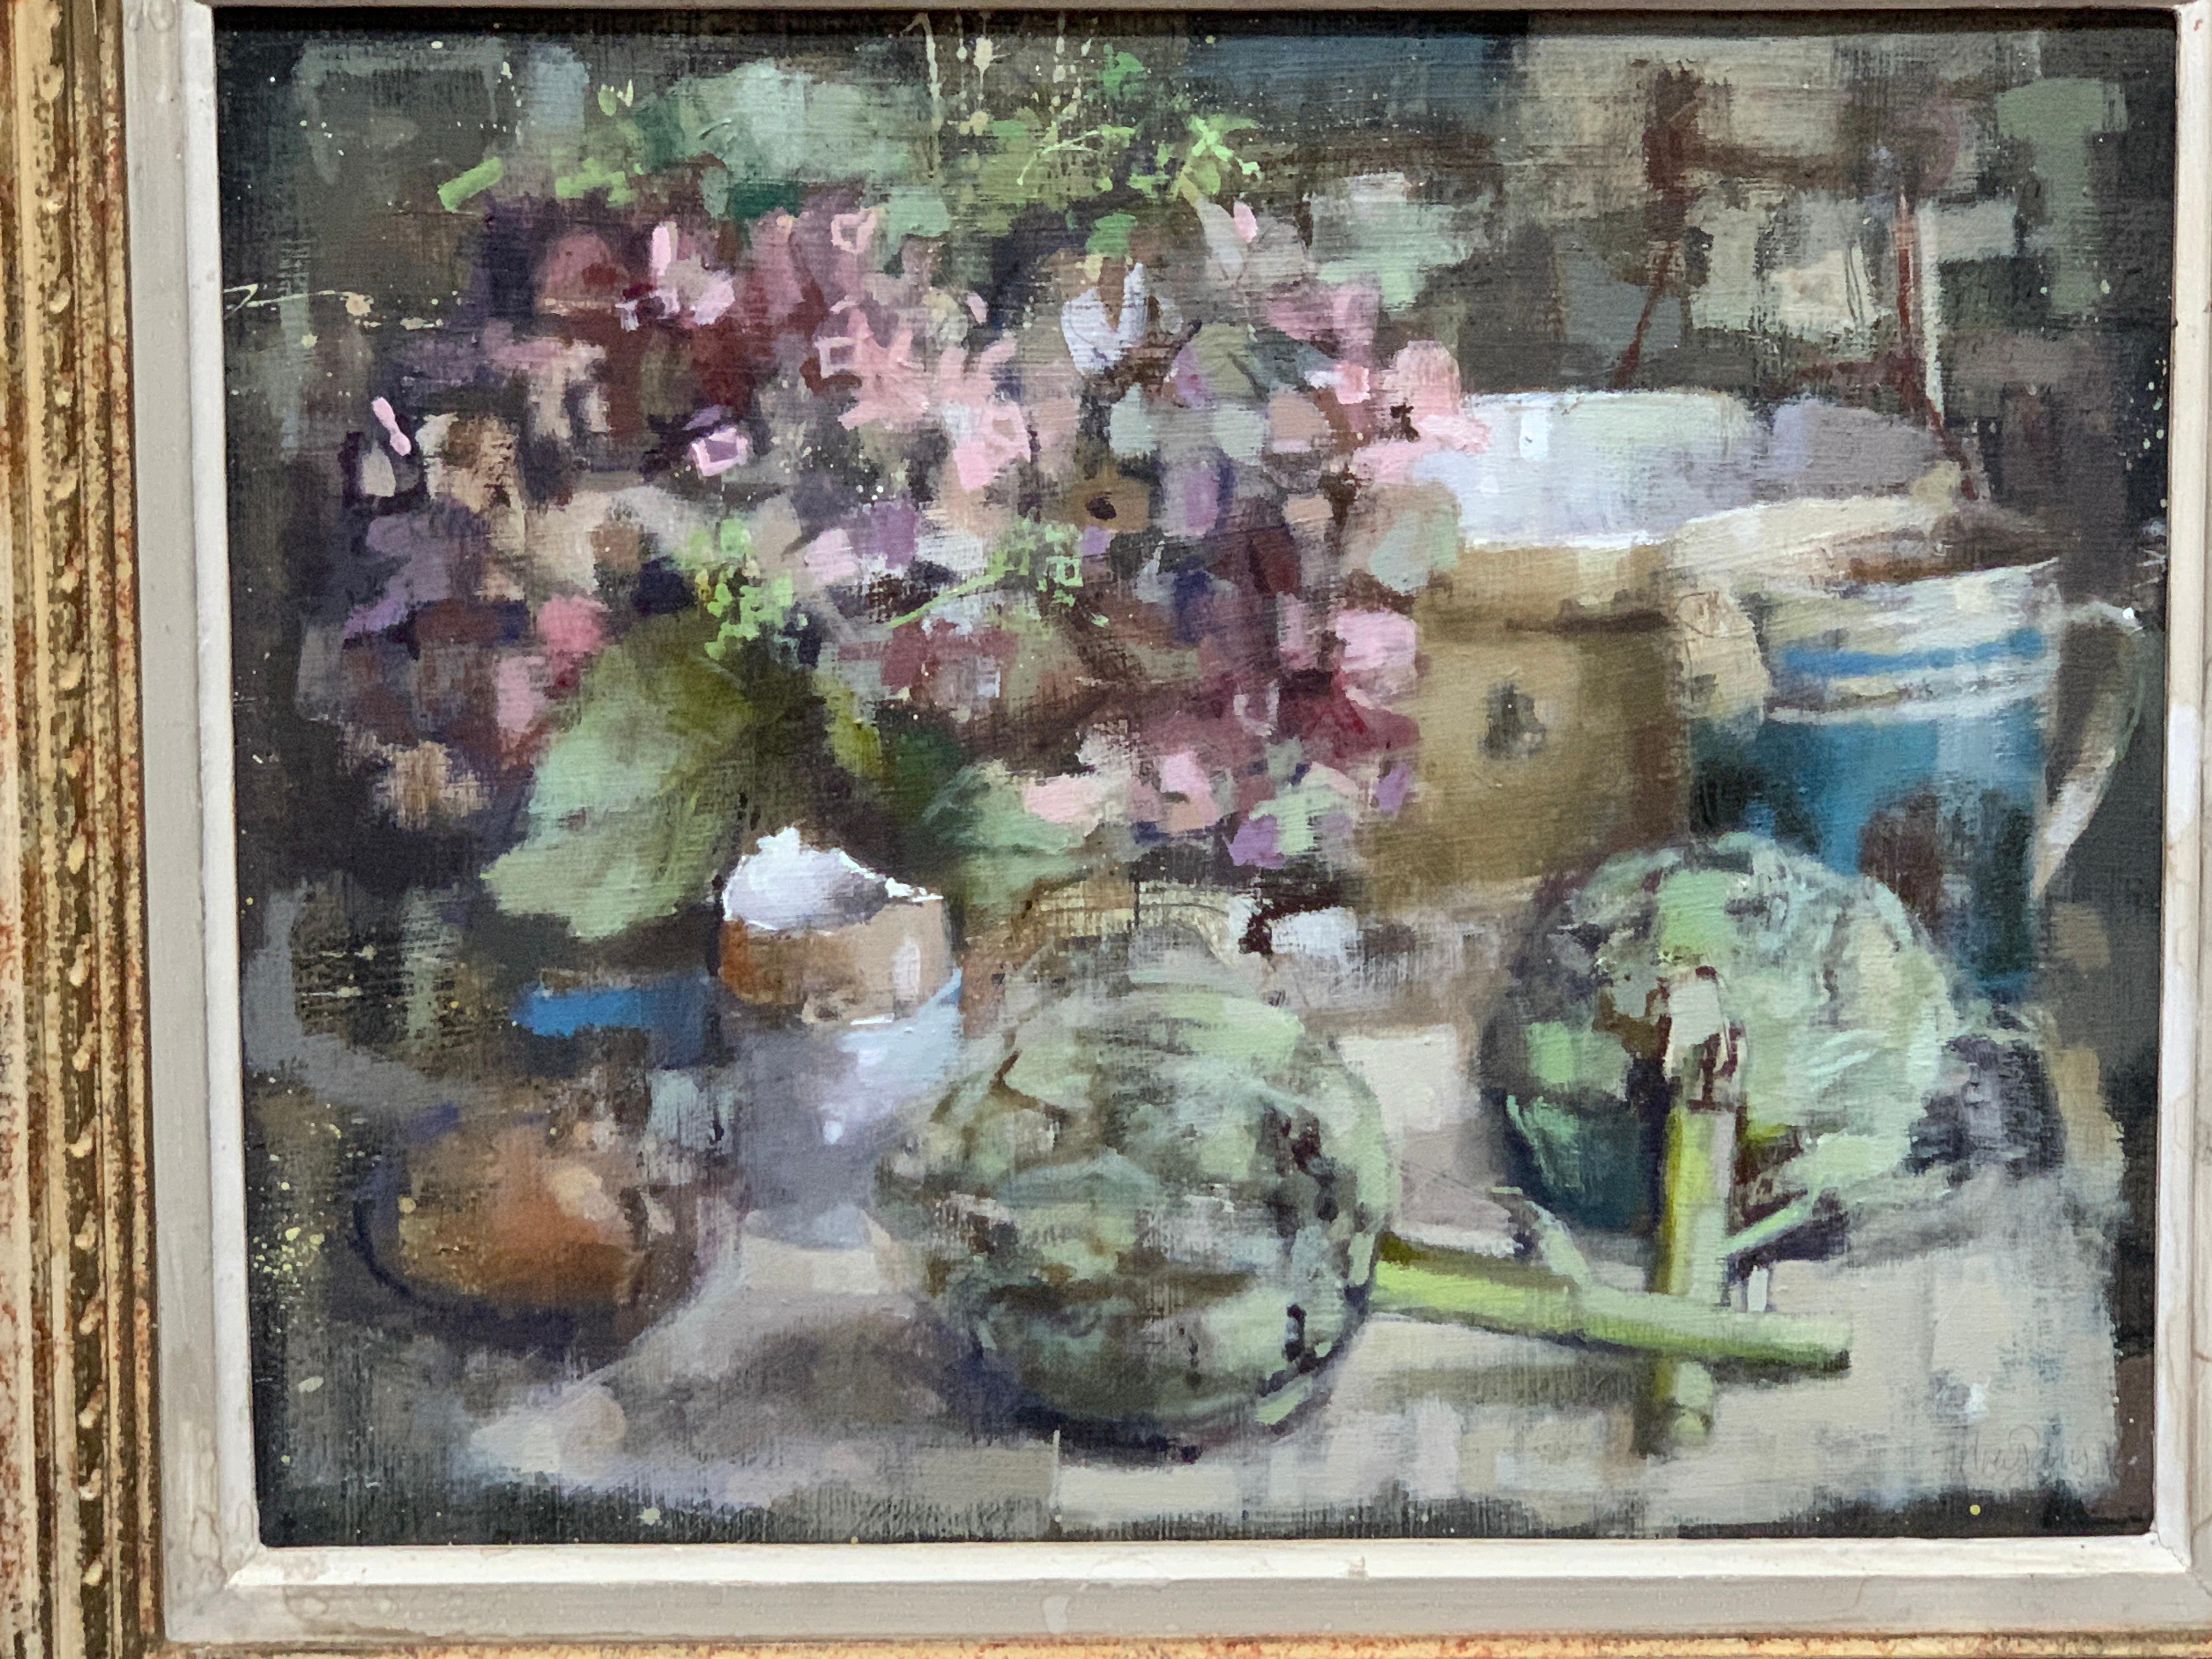 Modern British 20th century still life of a kitchen interior with artichoke etc - Painting by Andrew Davis